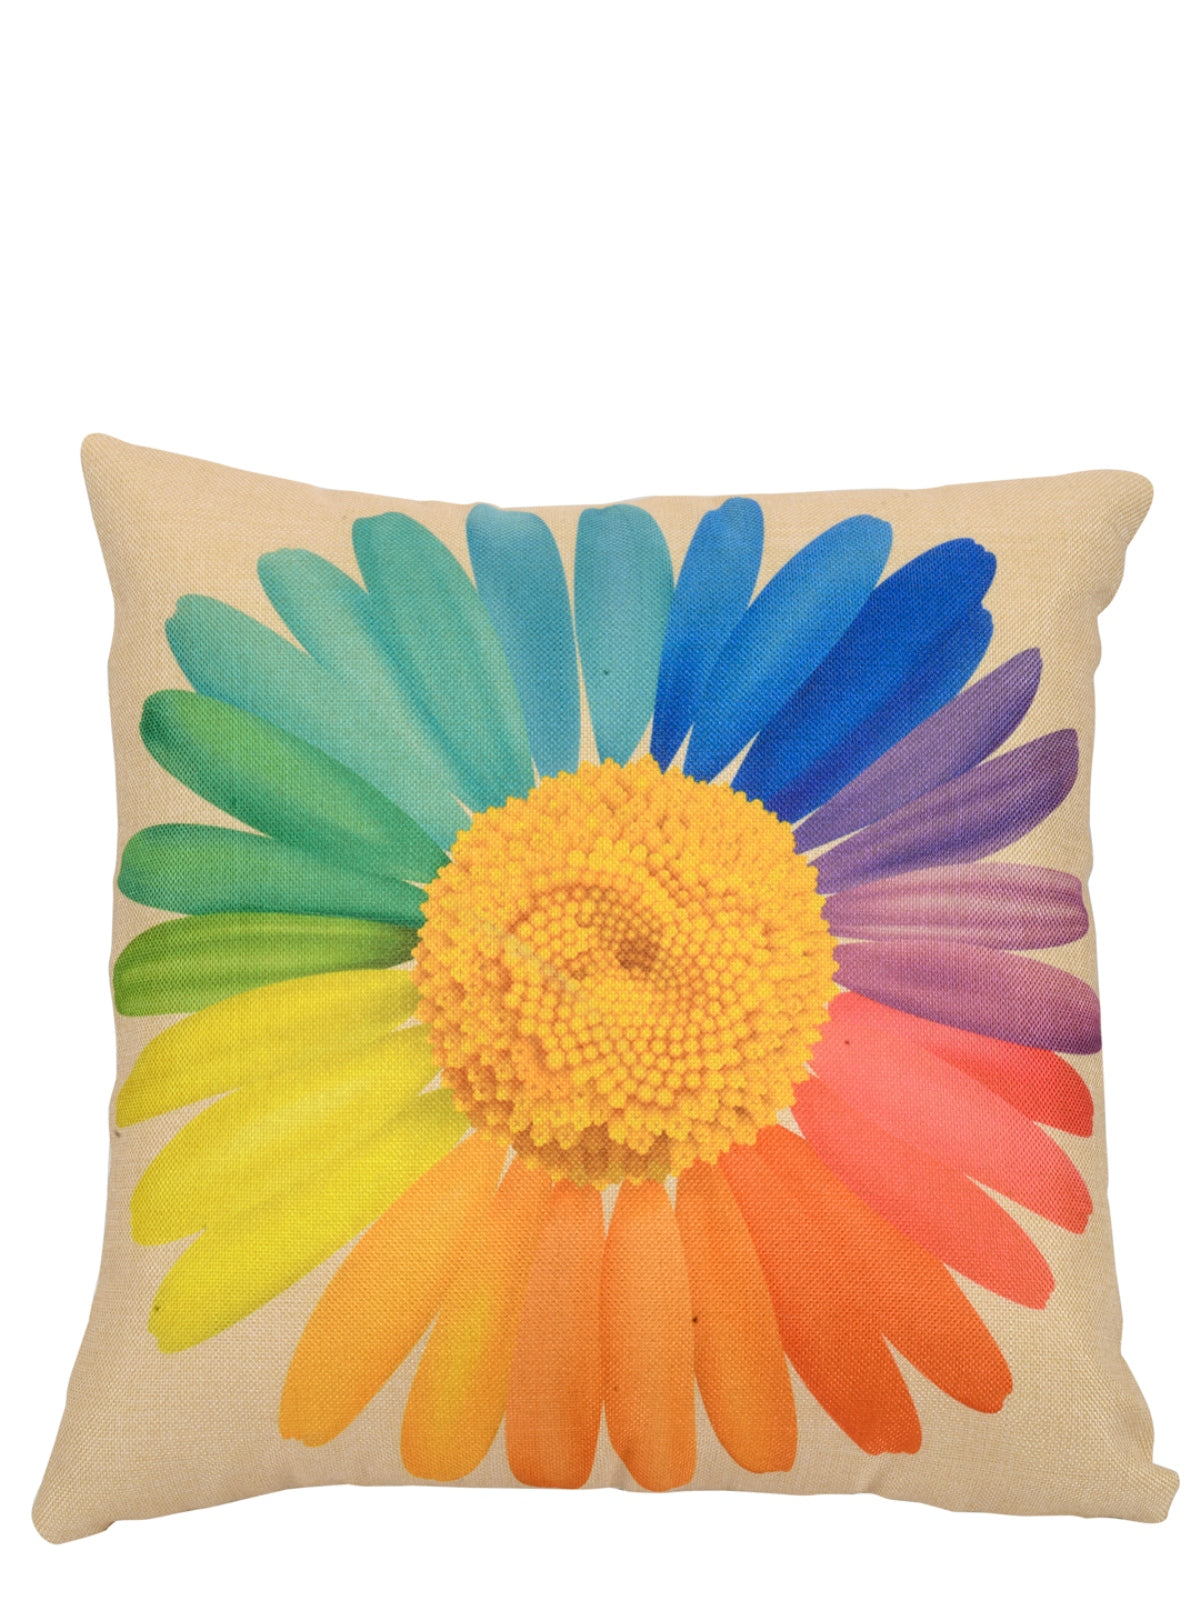 Soft Jute California Floral Printed Cushion Covers 16x16, Set of 5 - Multicolor